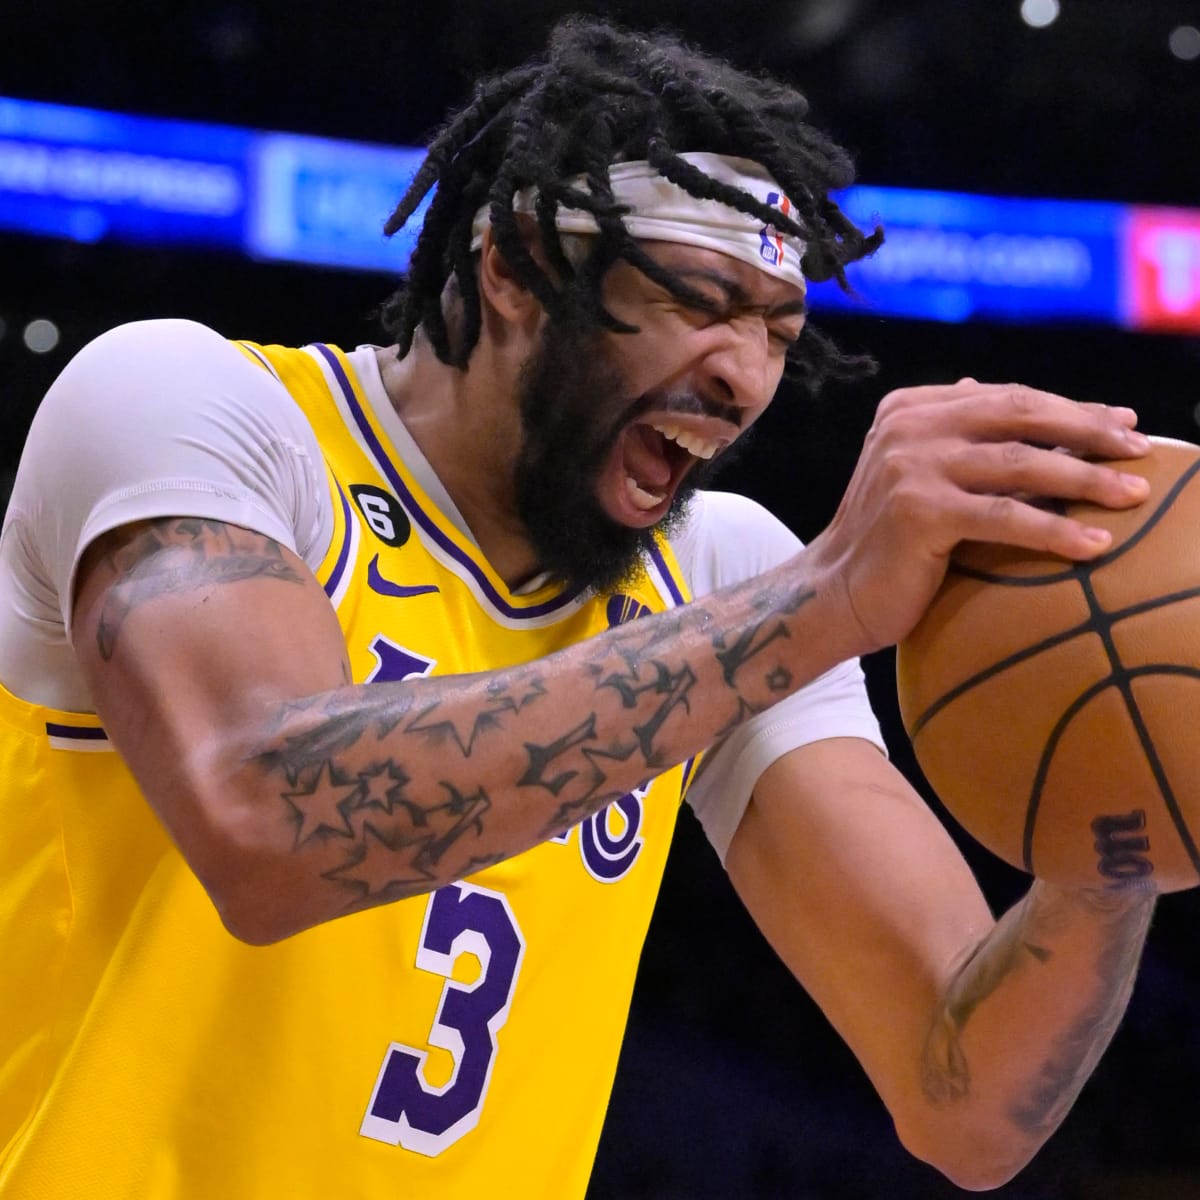 Anthony Davis is back as Lakers Push for NBA playoffs - Sports